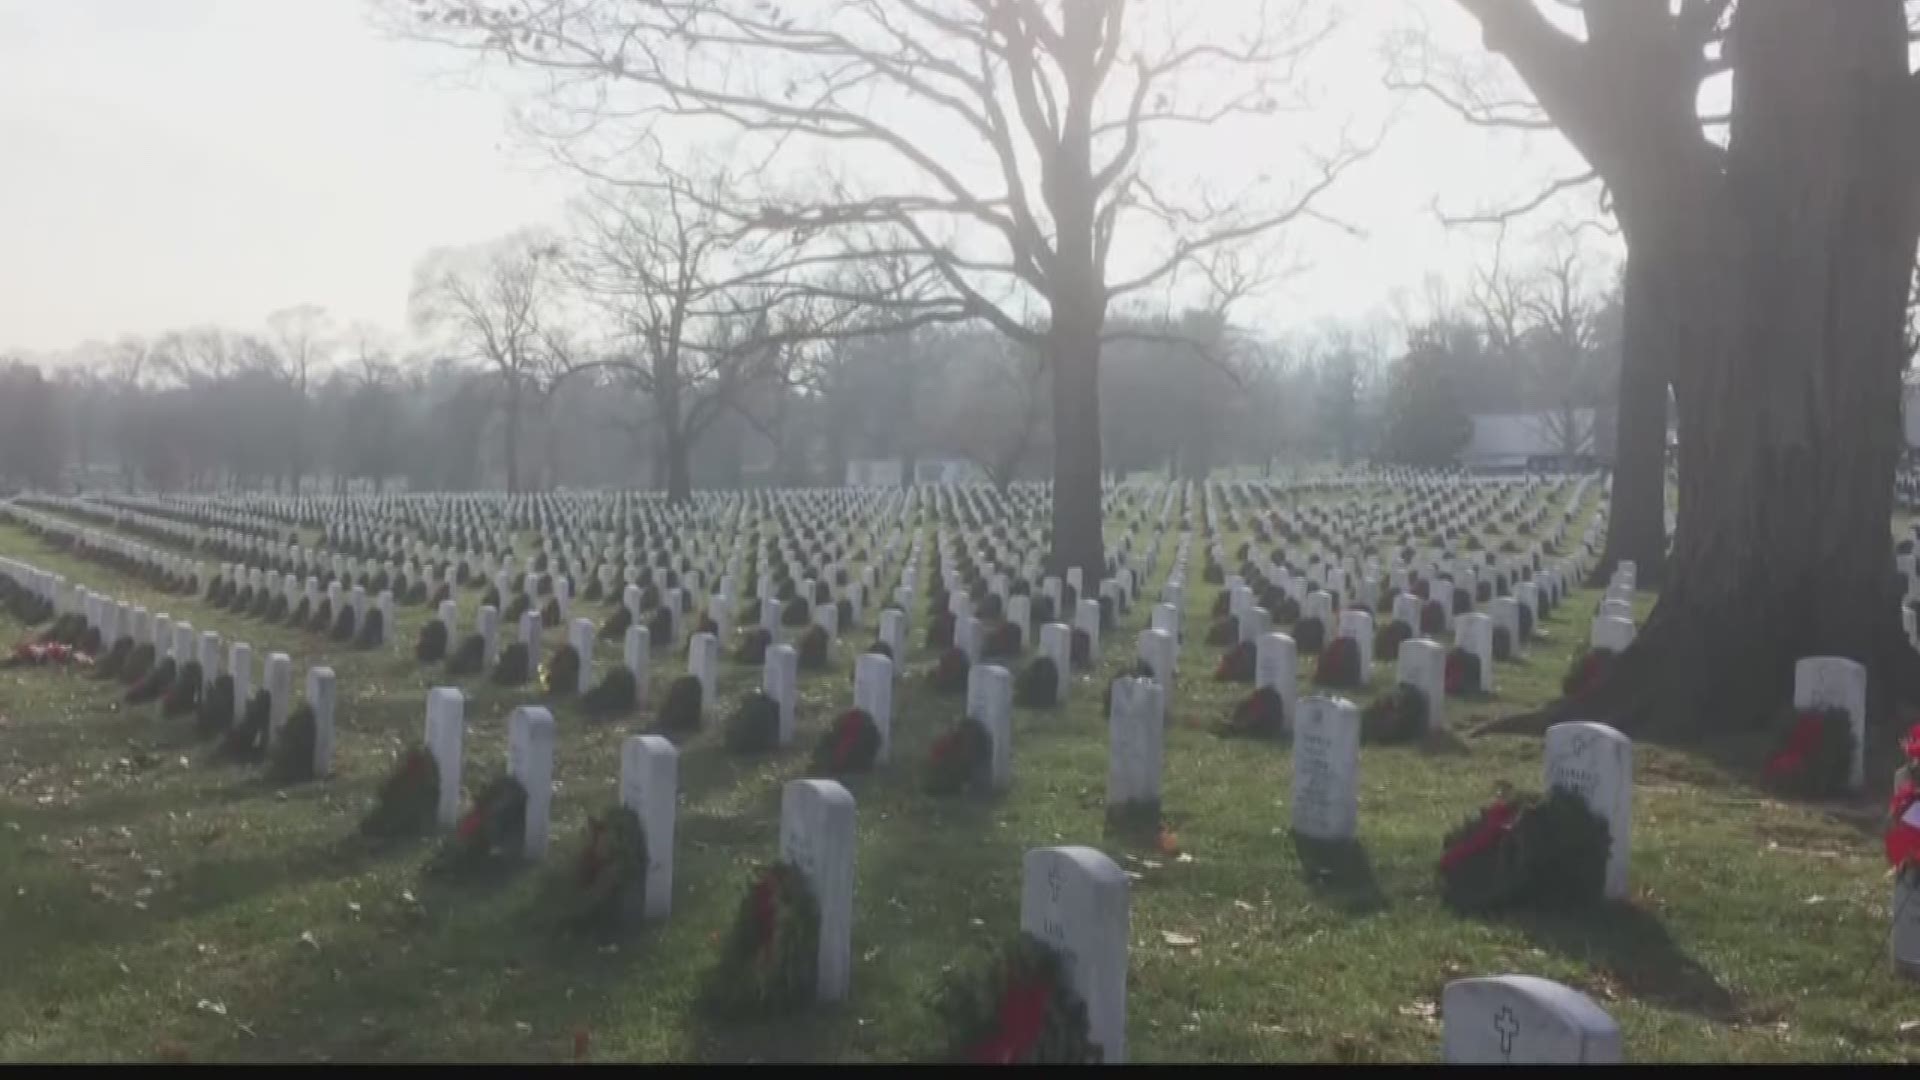 local-business-gives-big-donation-to-wreaths-across-america